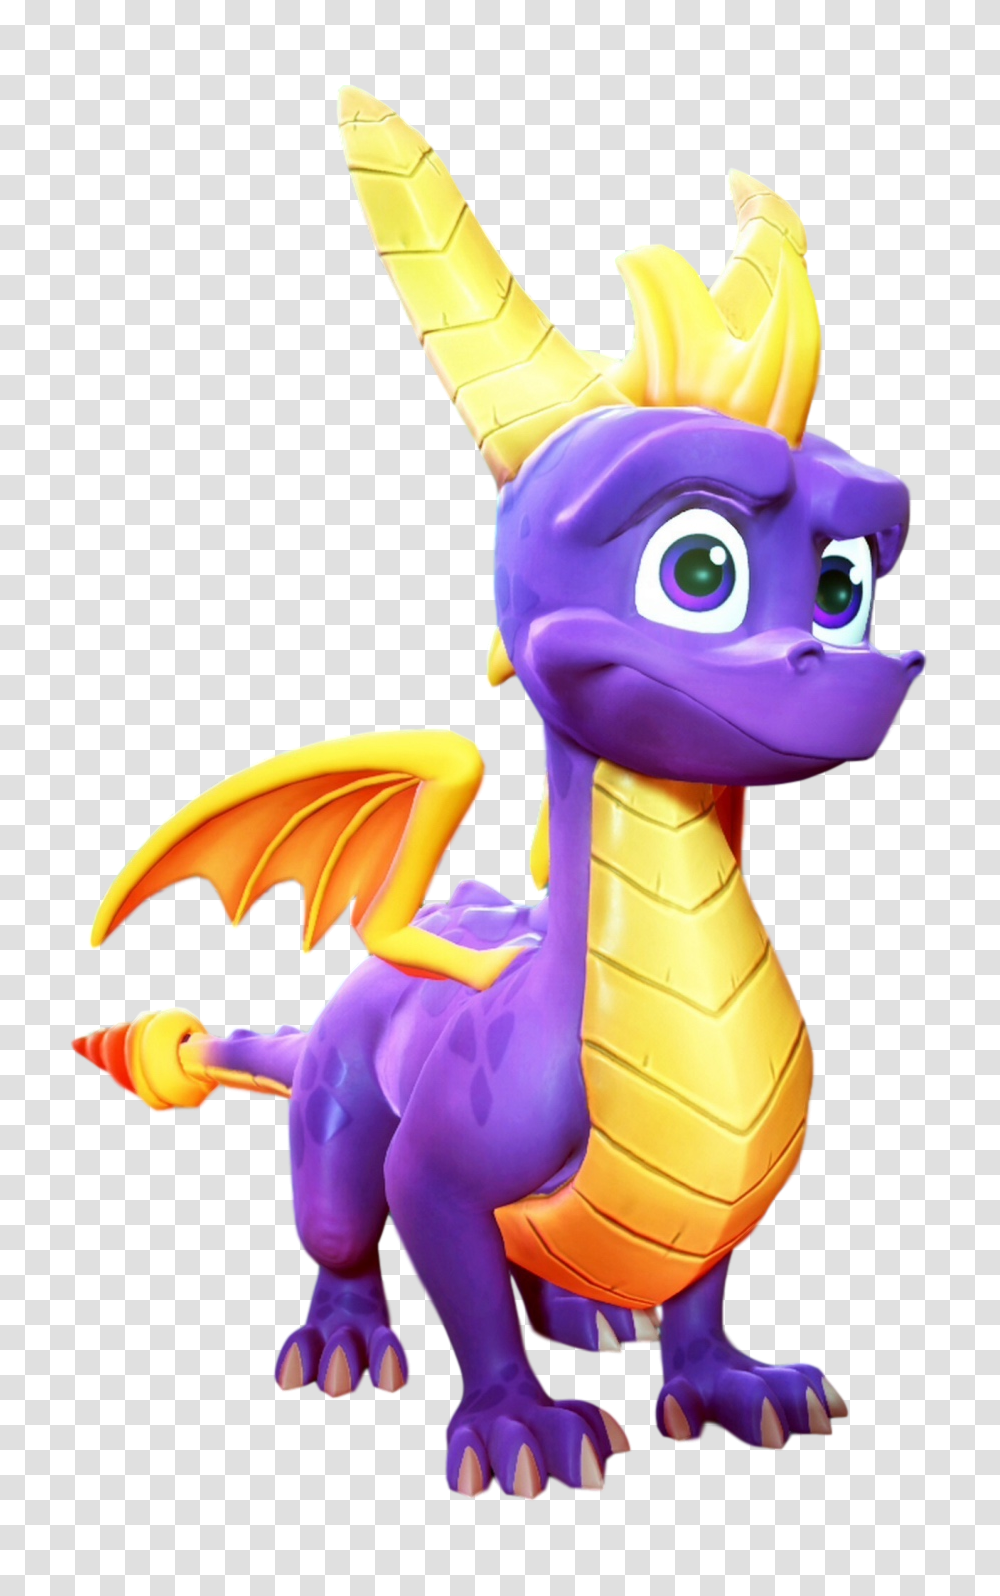 Spyro The Dragon Bandipedia Fandom Powered By Wikia, Toy, Figurine, Inflatable, PEZ Dispenser Transparent Png